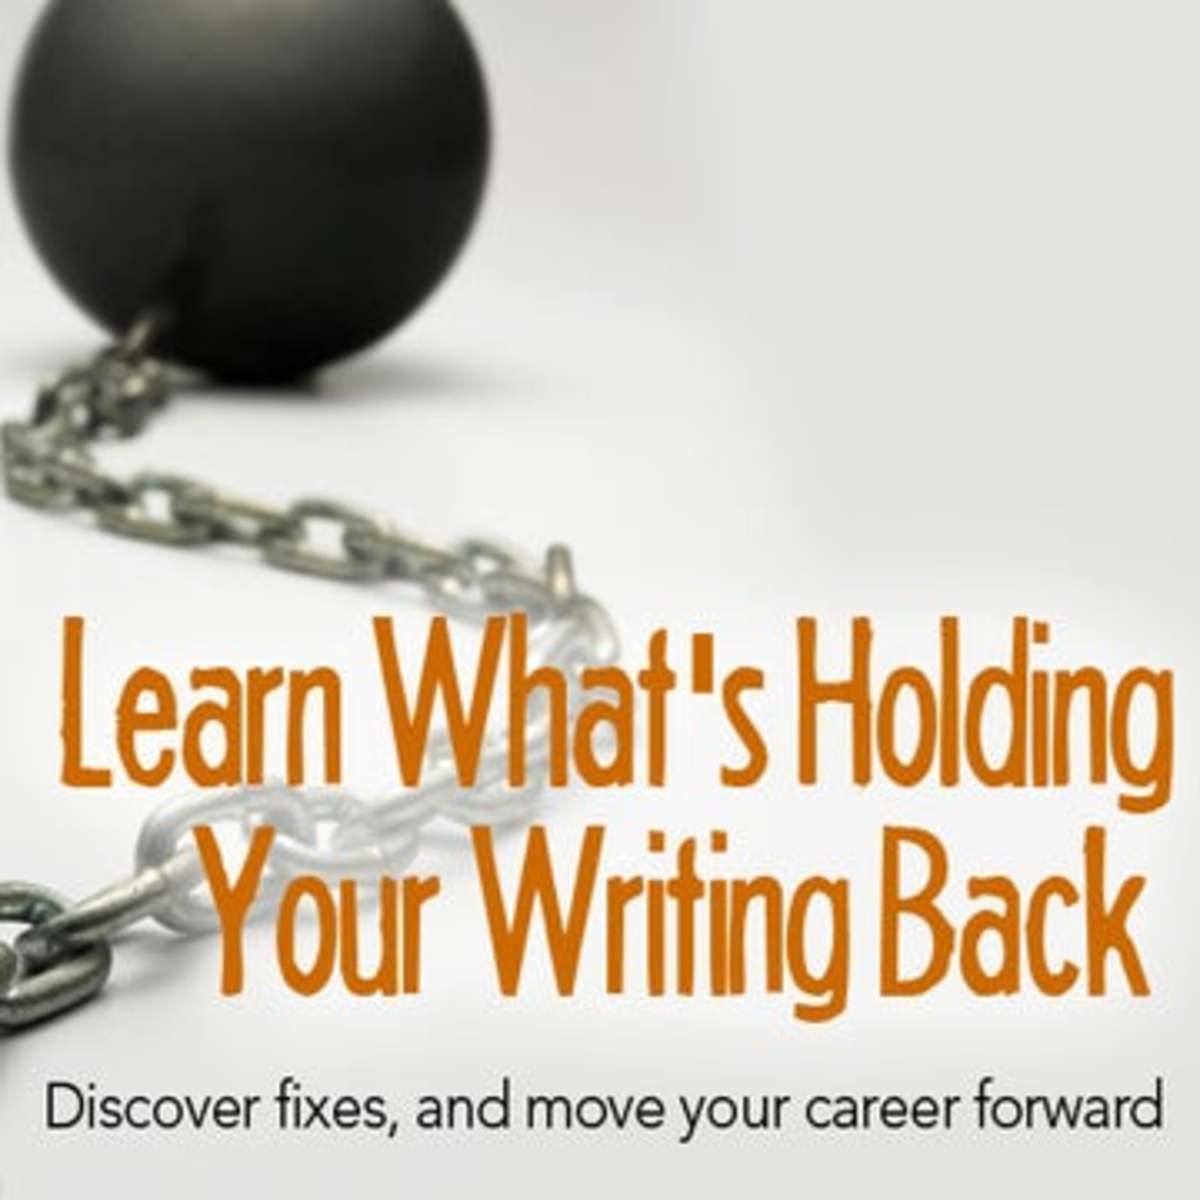 500_learn-what_s-holding-back_360x